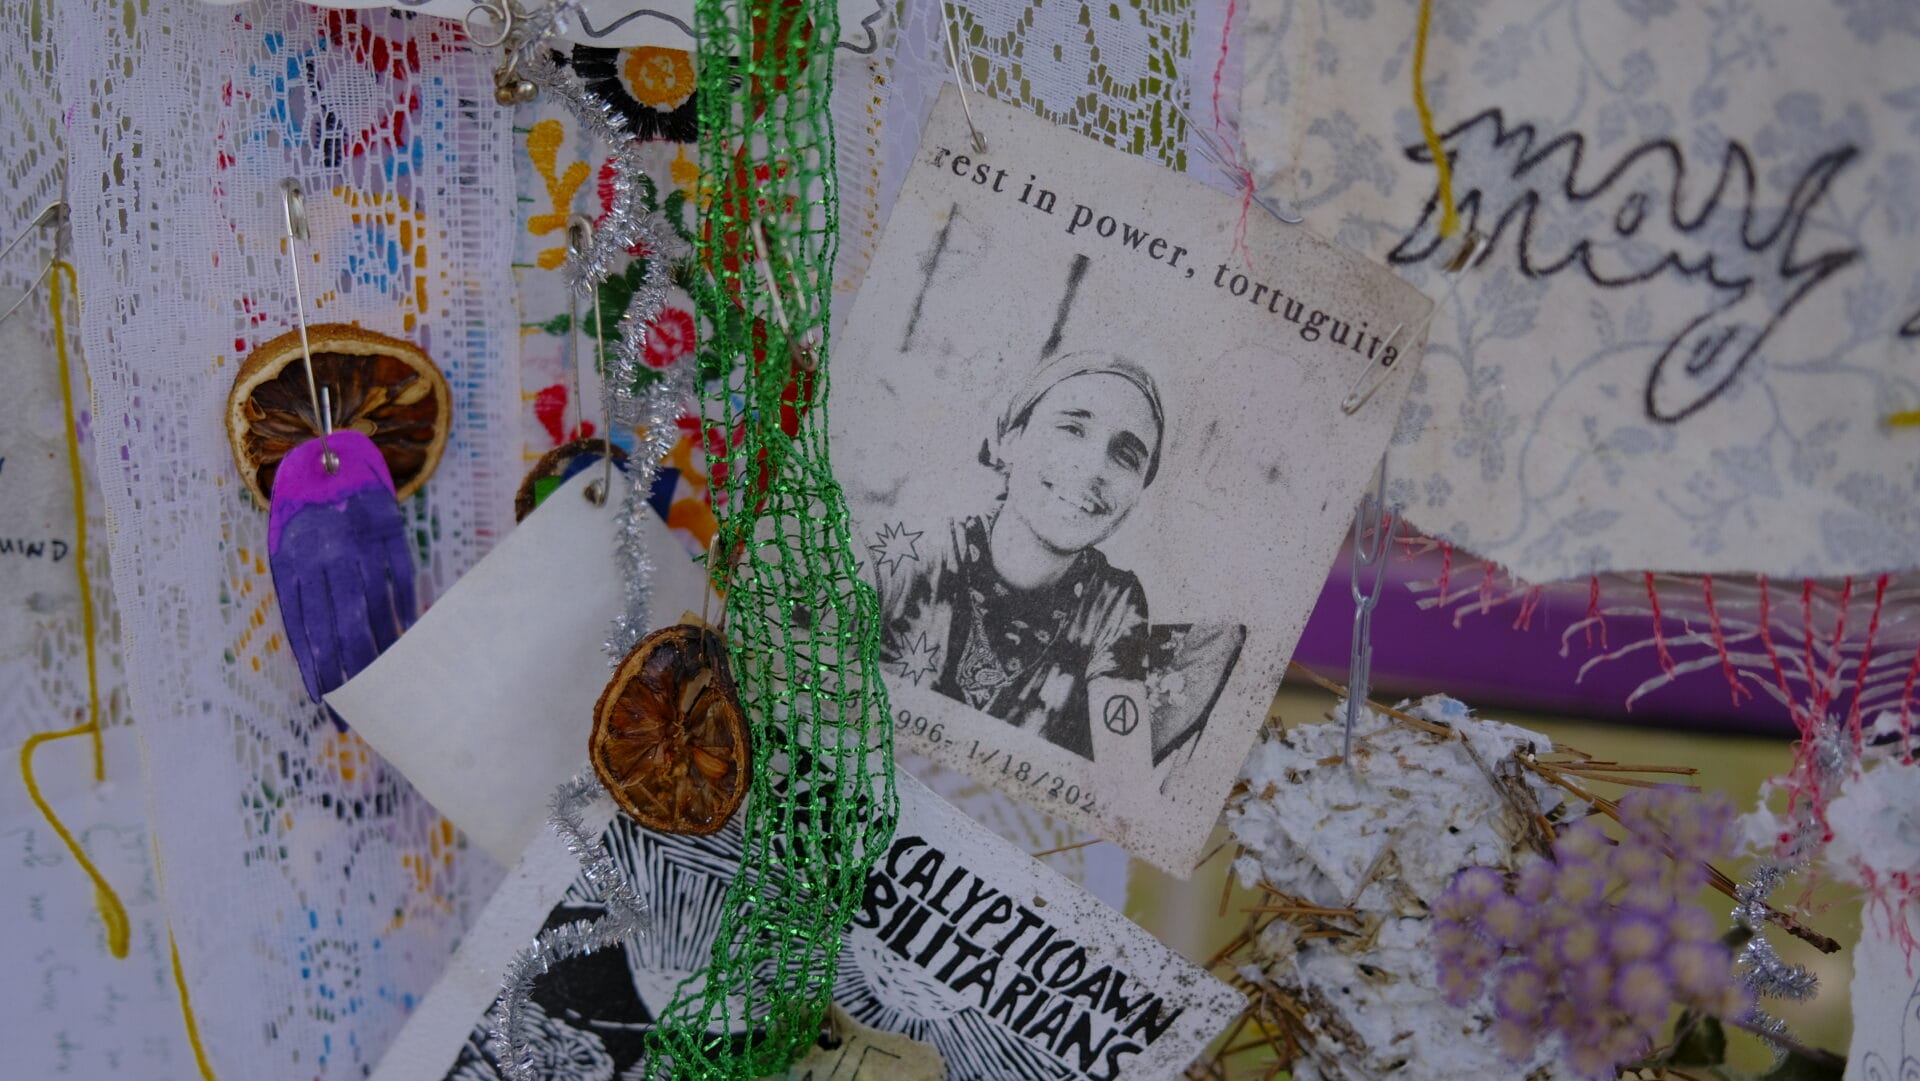 A picture of Manuel "Tortuguita" Terán hangs in the VRT lab as part of an altar for collective grief and mourning. Photo credit: Maggie Kane.